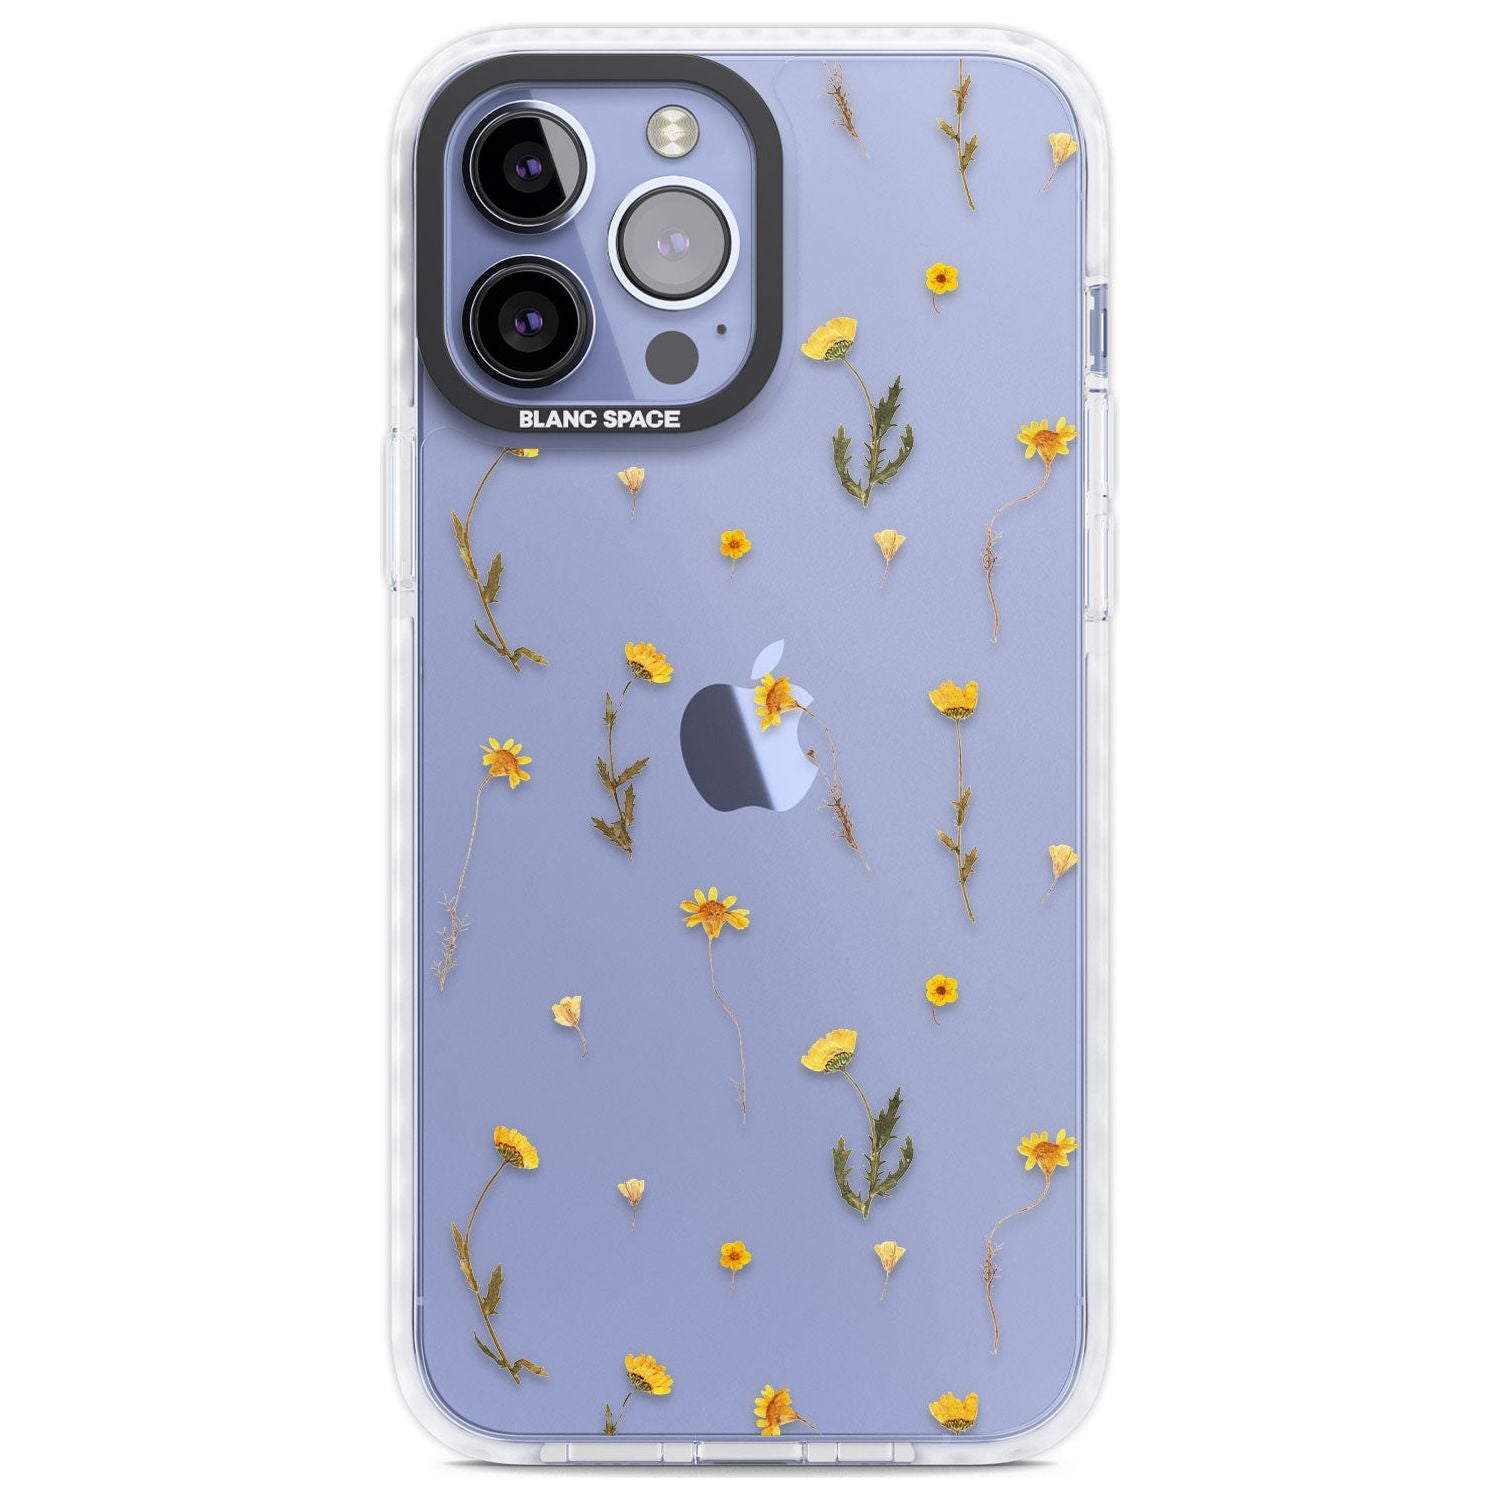 Mixed Yellow Flowers - Dried Flower-Inspired Phone Case iPhone 13 Pro Max / Impact Case,iPhone 14 Pro Max / Impact Case Blanc Space